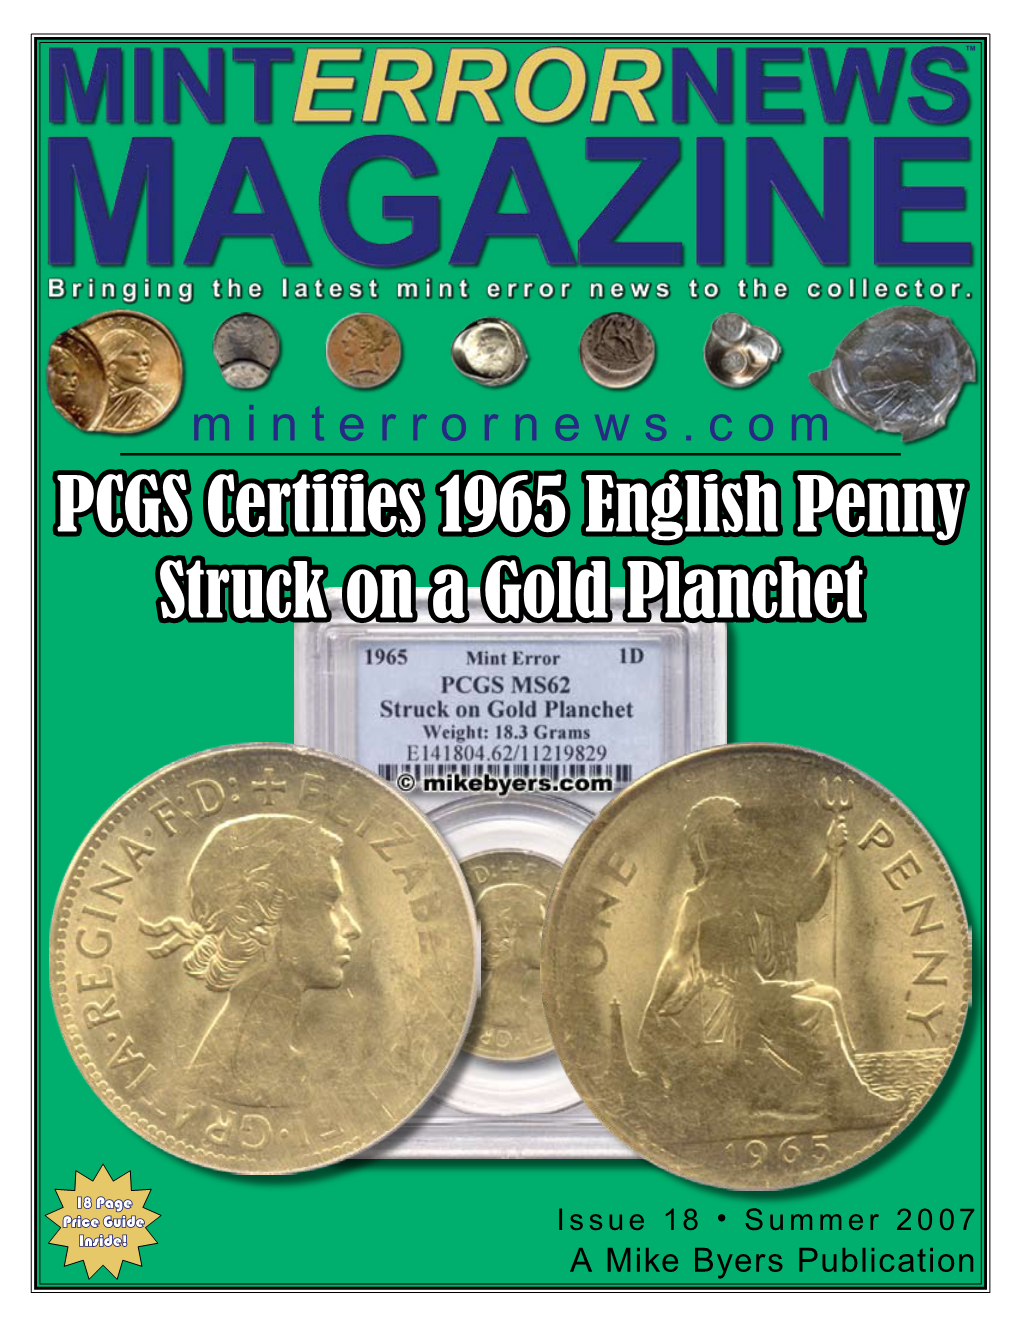 PCGS Certifies 1965 English Penny Struck on a Gold Planchet